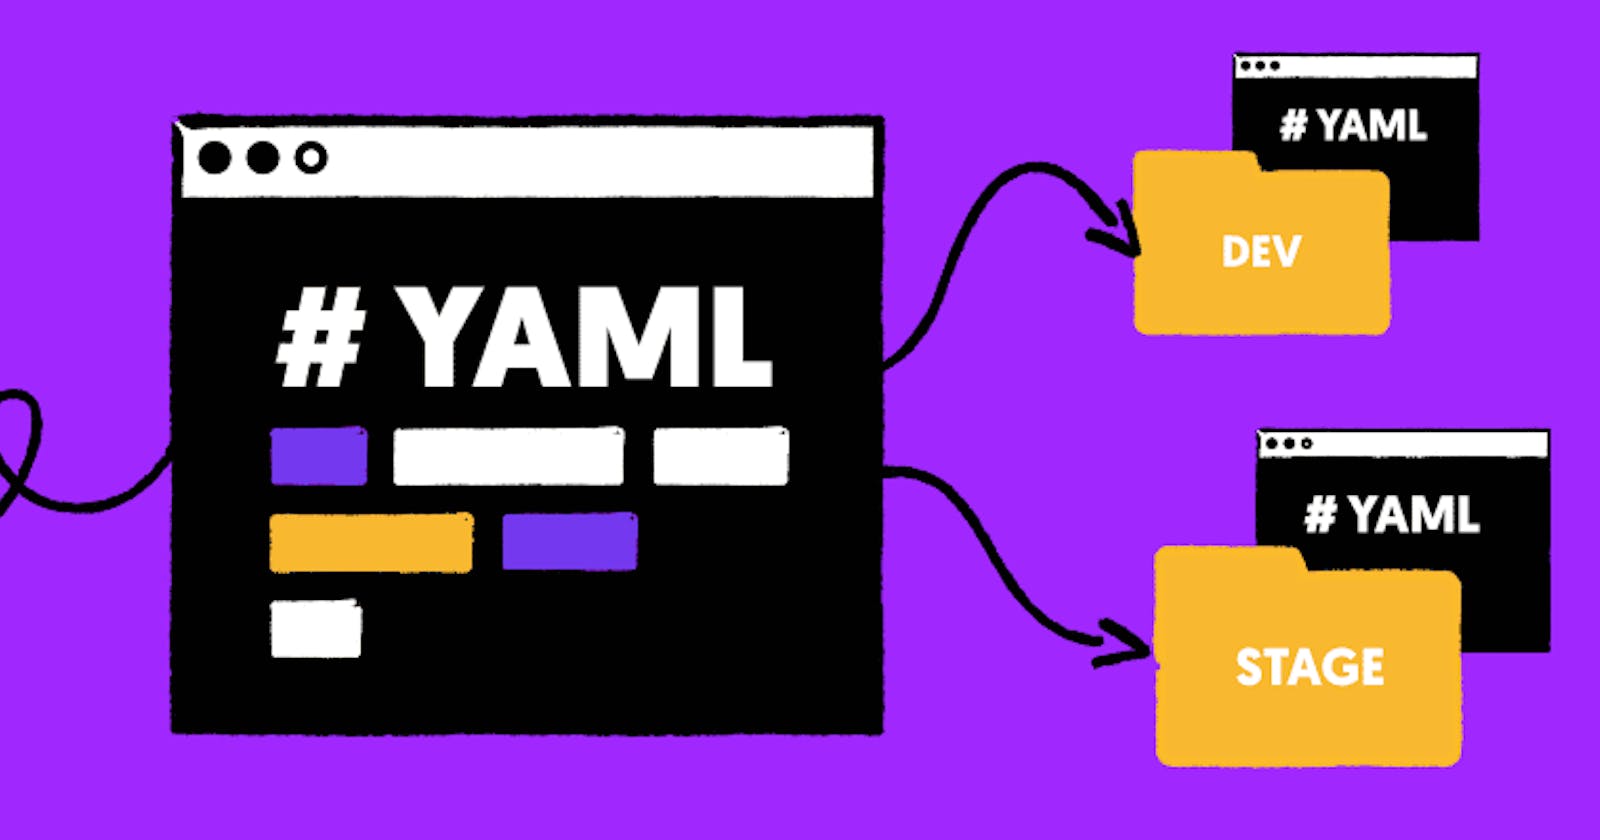 YAML - What is it ??